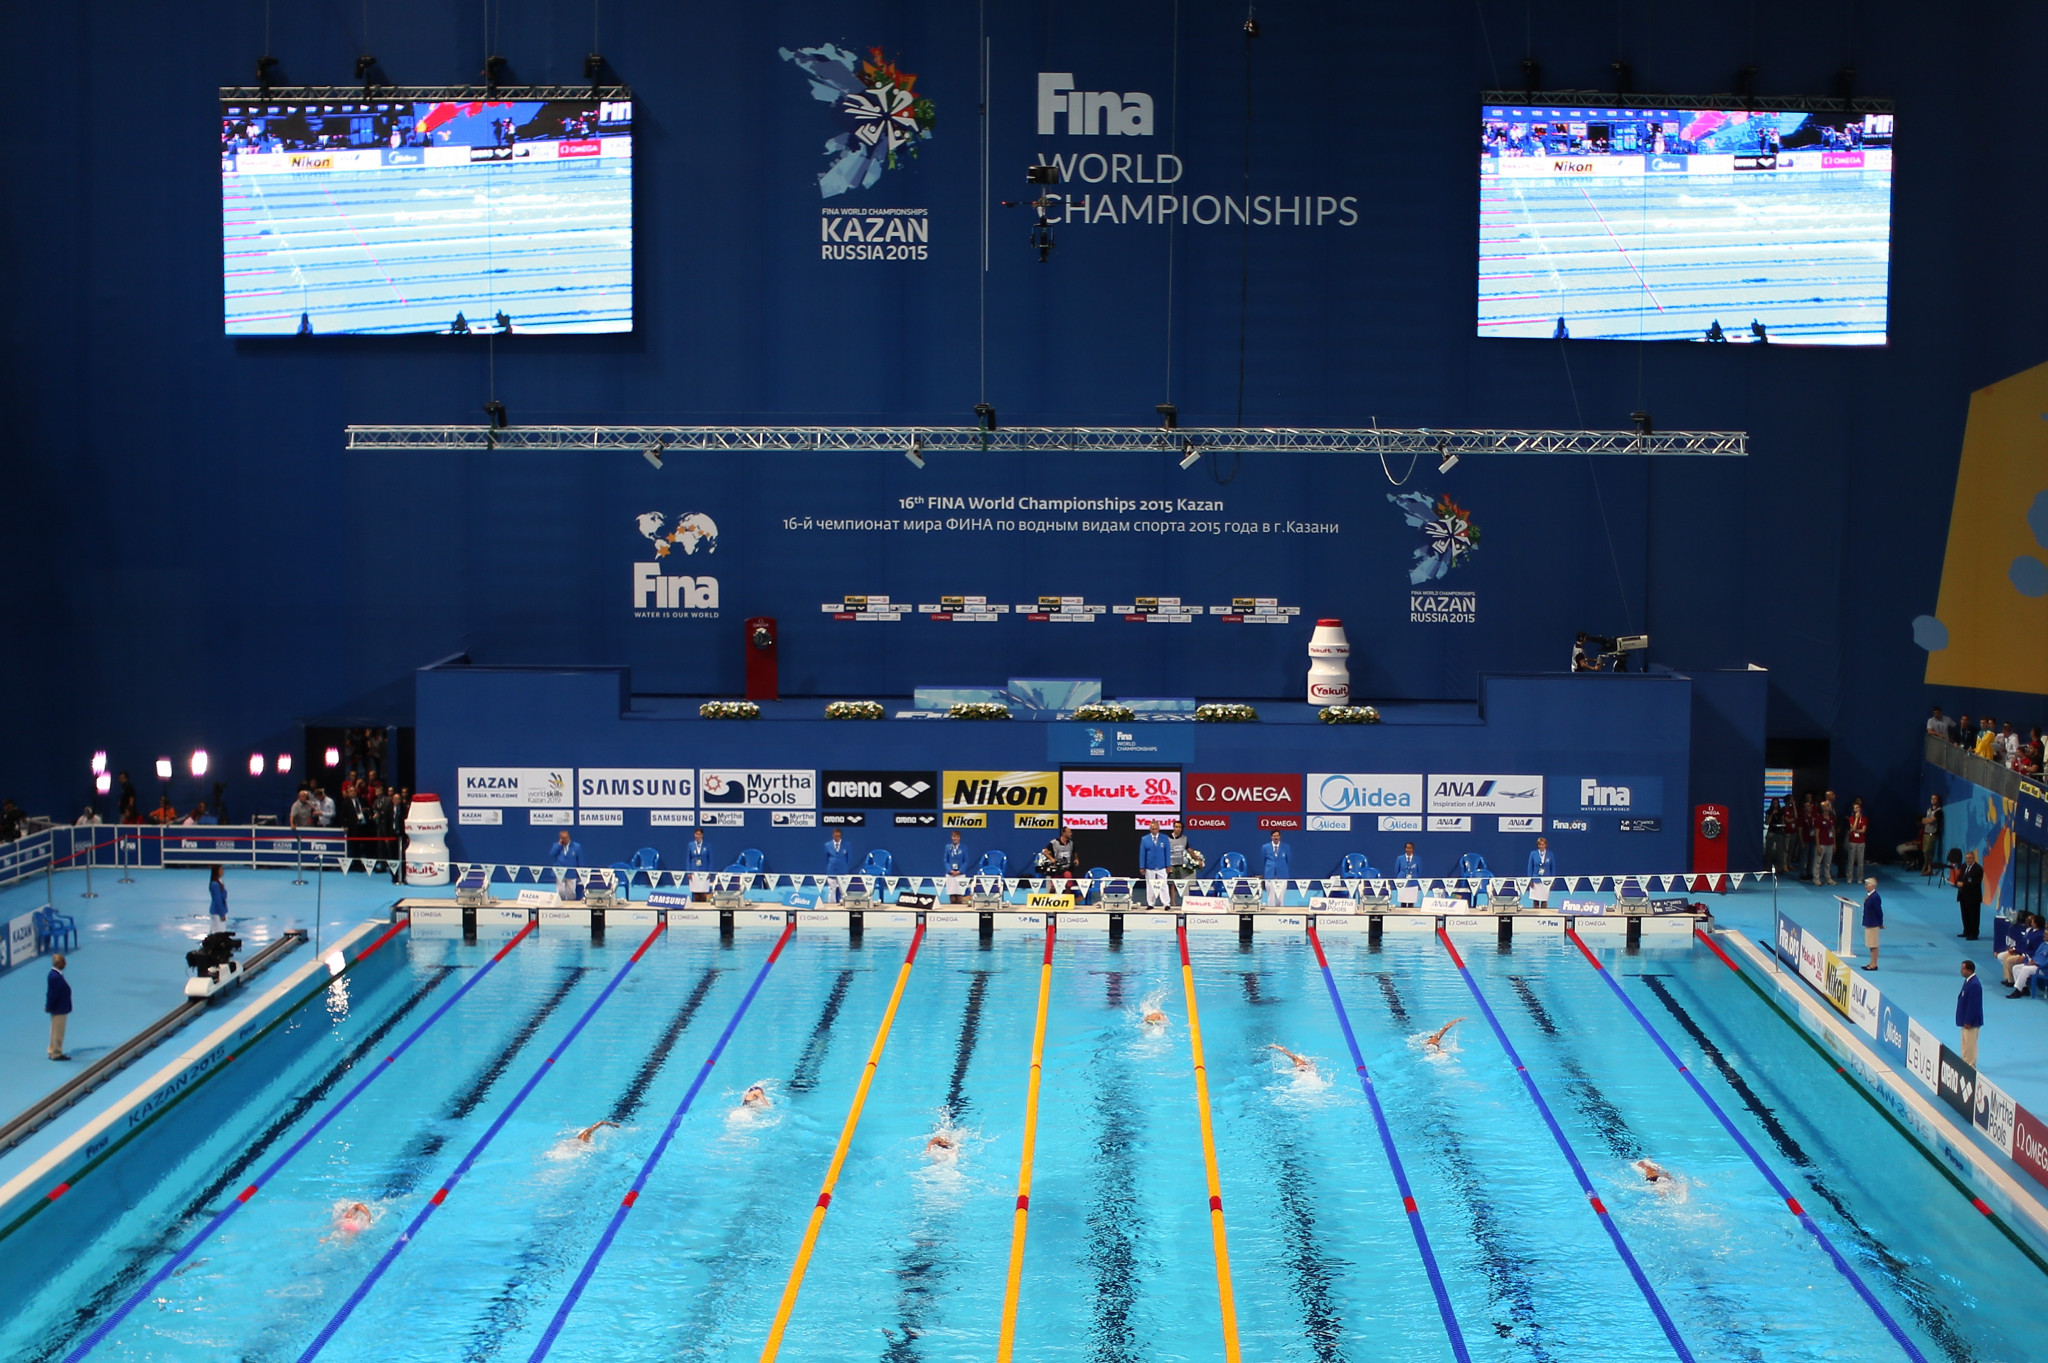 FINA cancels World Junior Swimming Championships in Kazan and will not hold events in Russia "if this grave crisis continues"